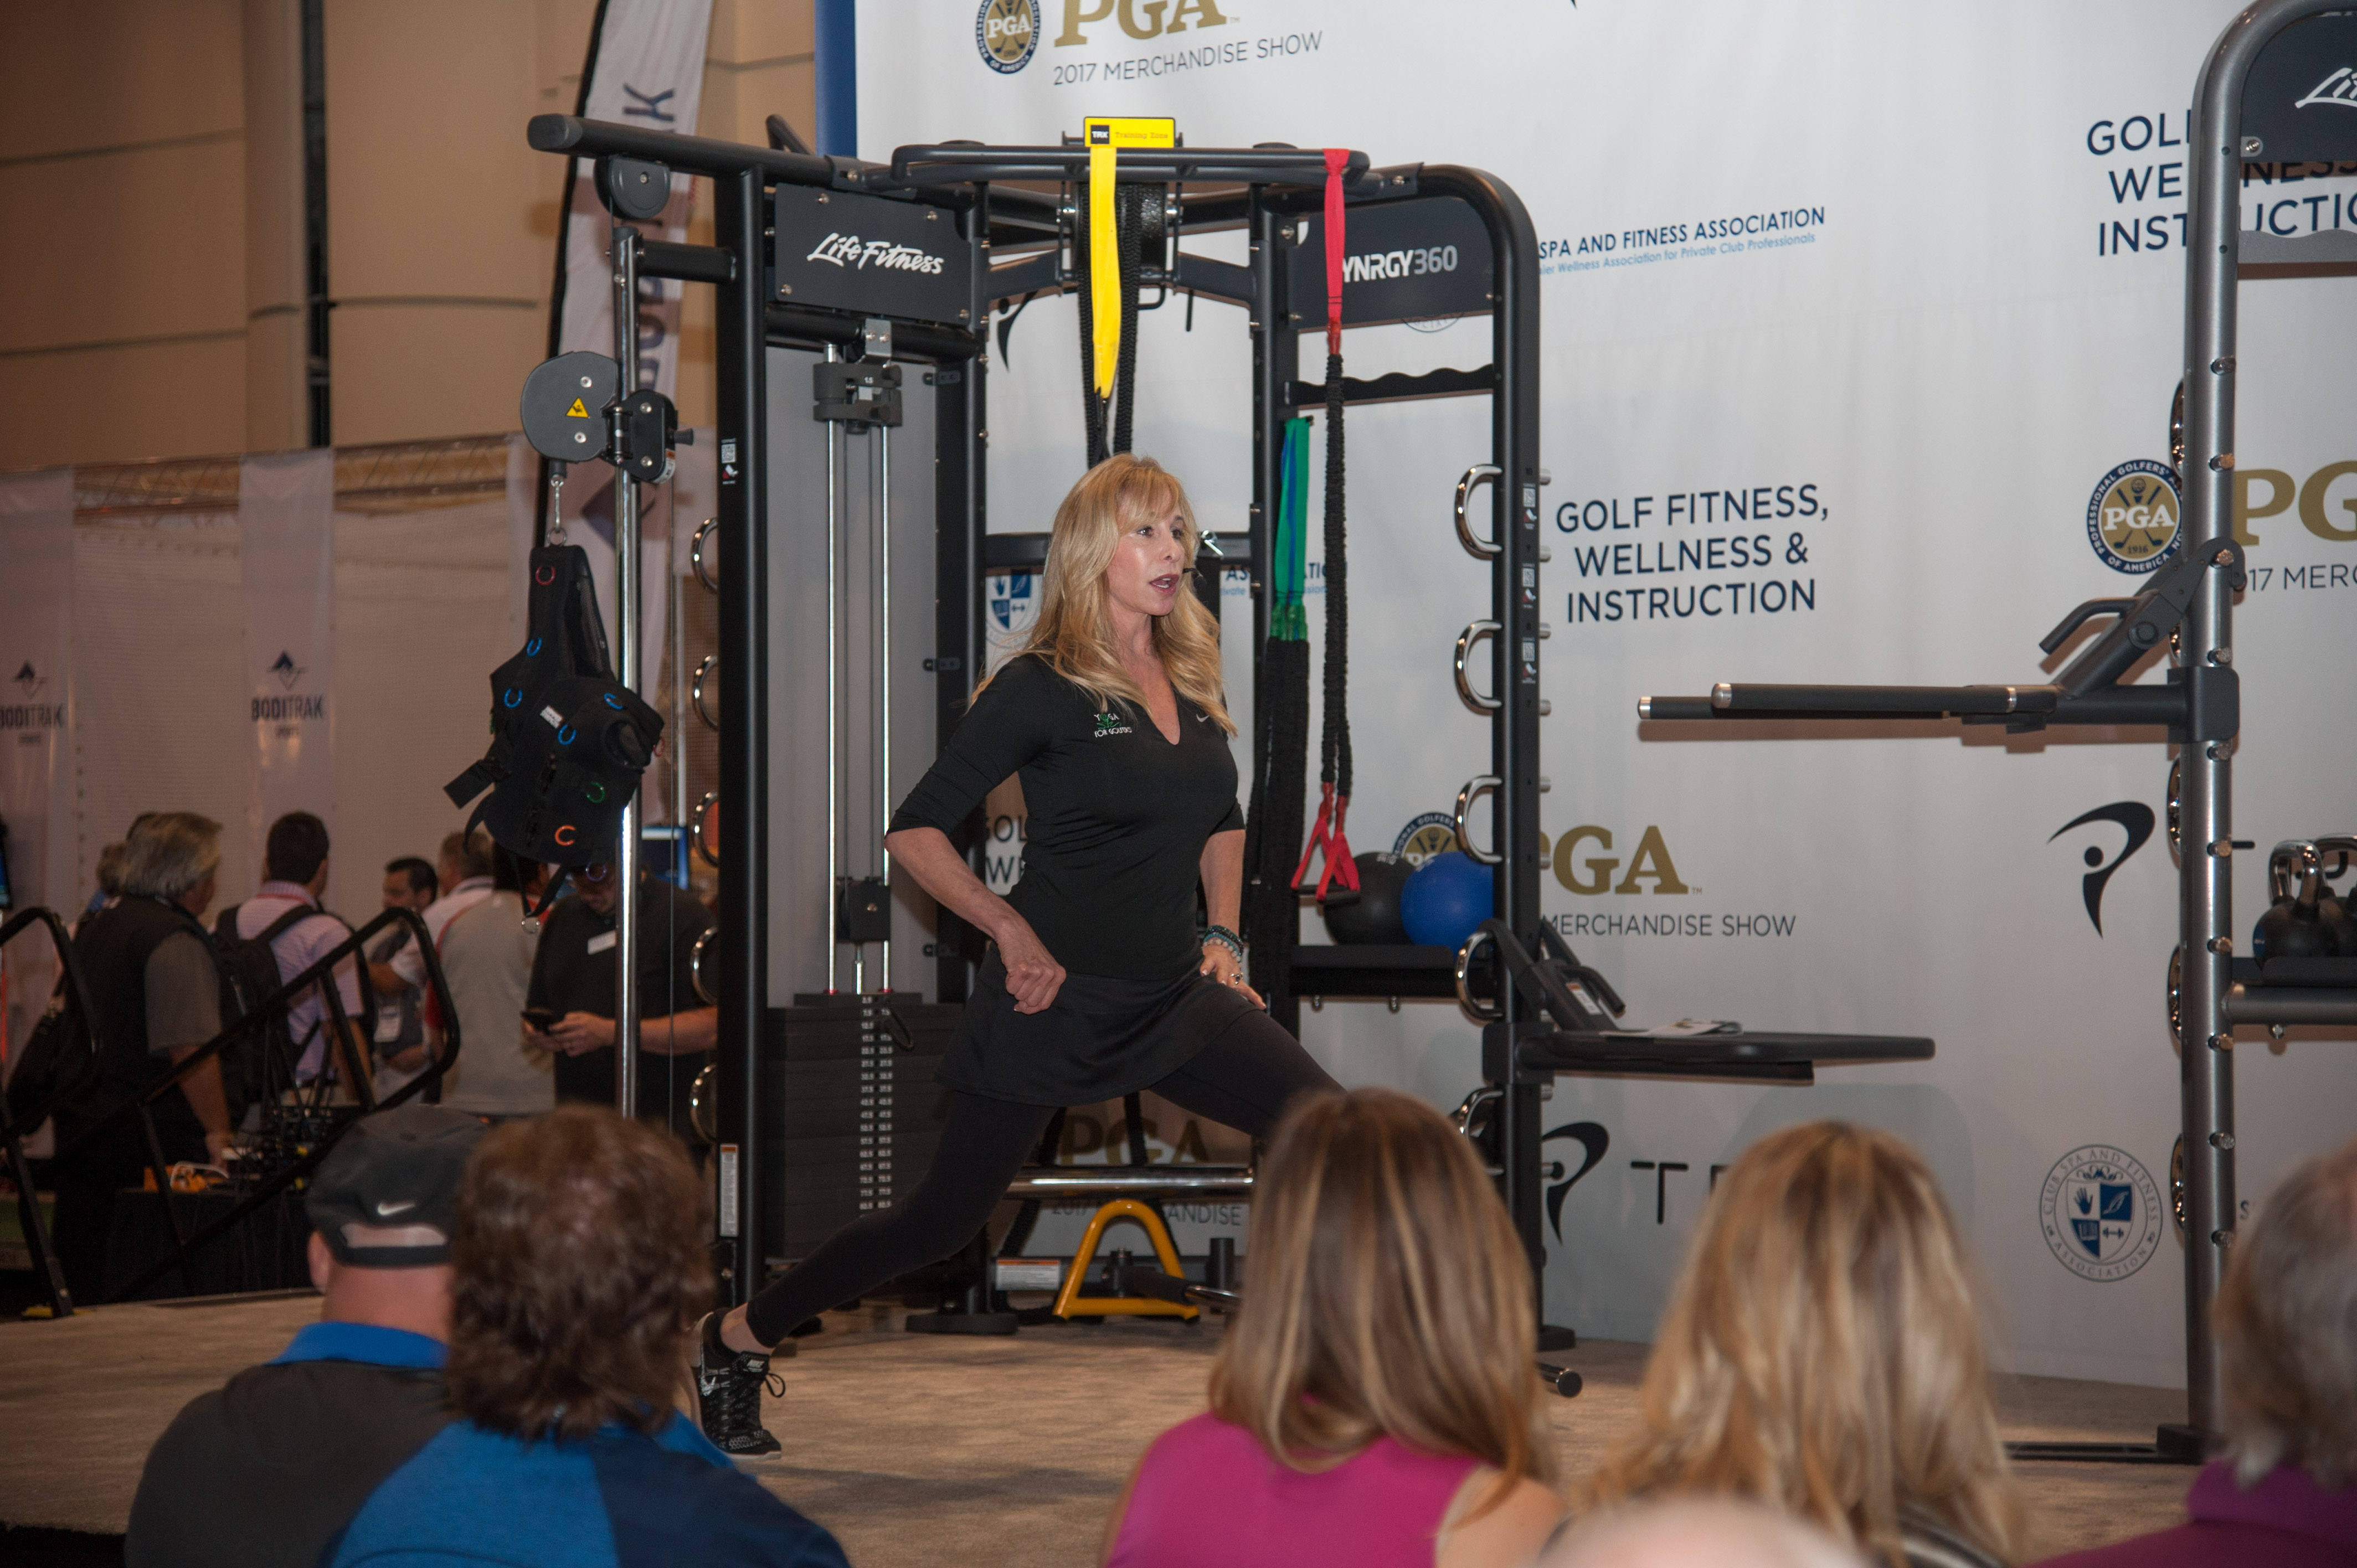 Golf Fitness, Wellness & Instruction Programs featured at the 2018 PGA Merchandise Show